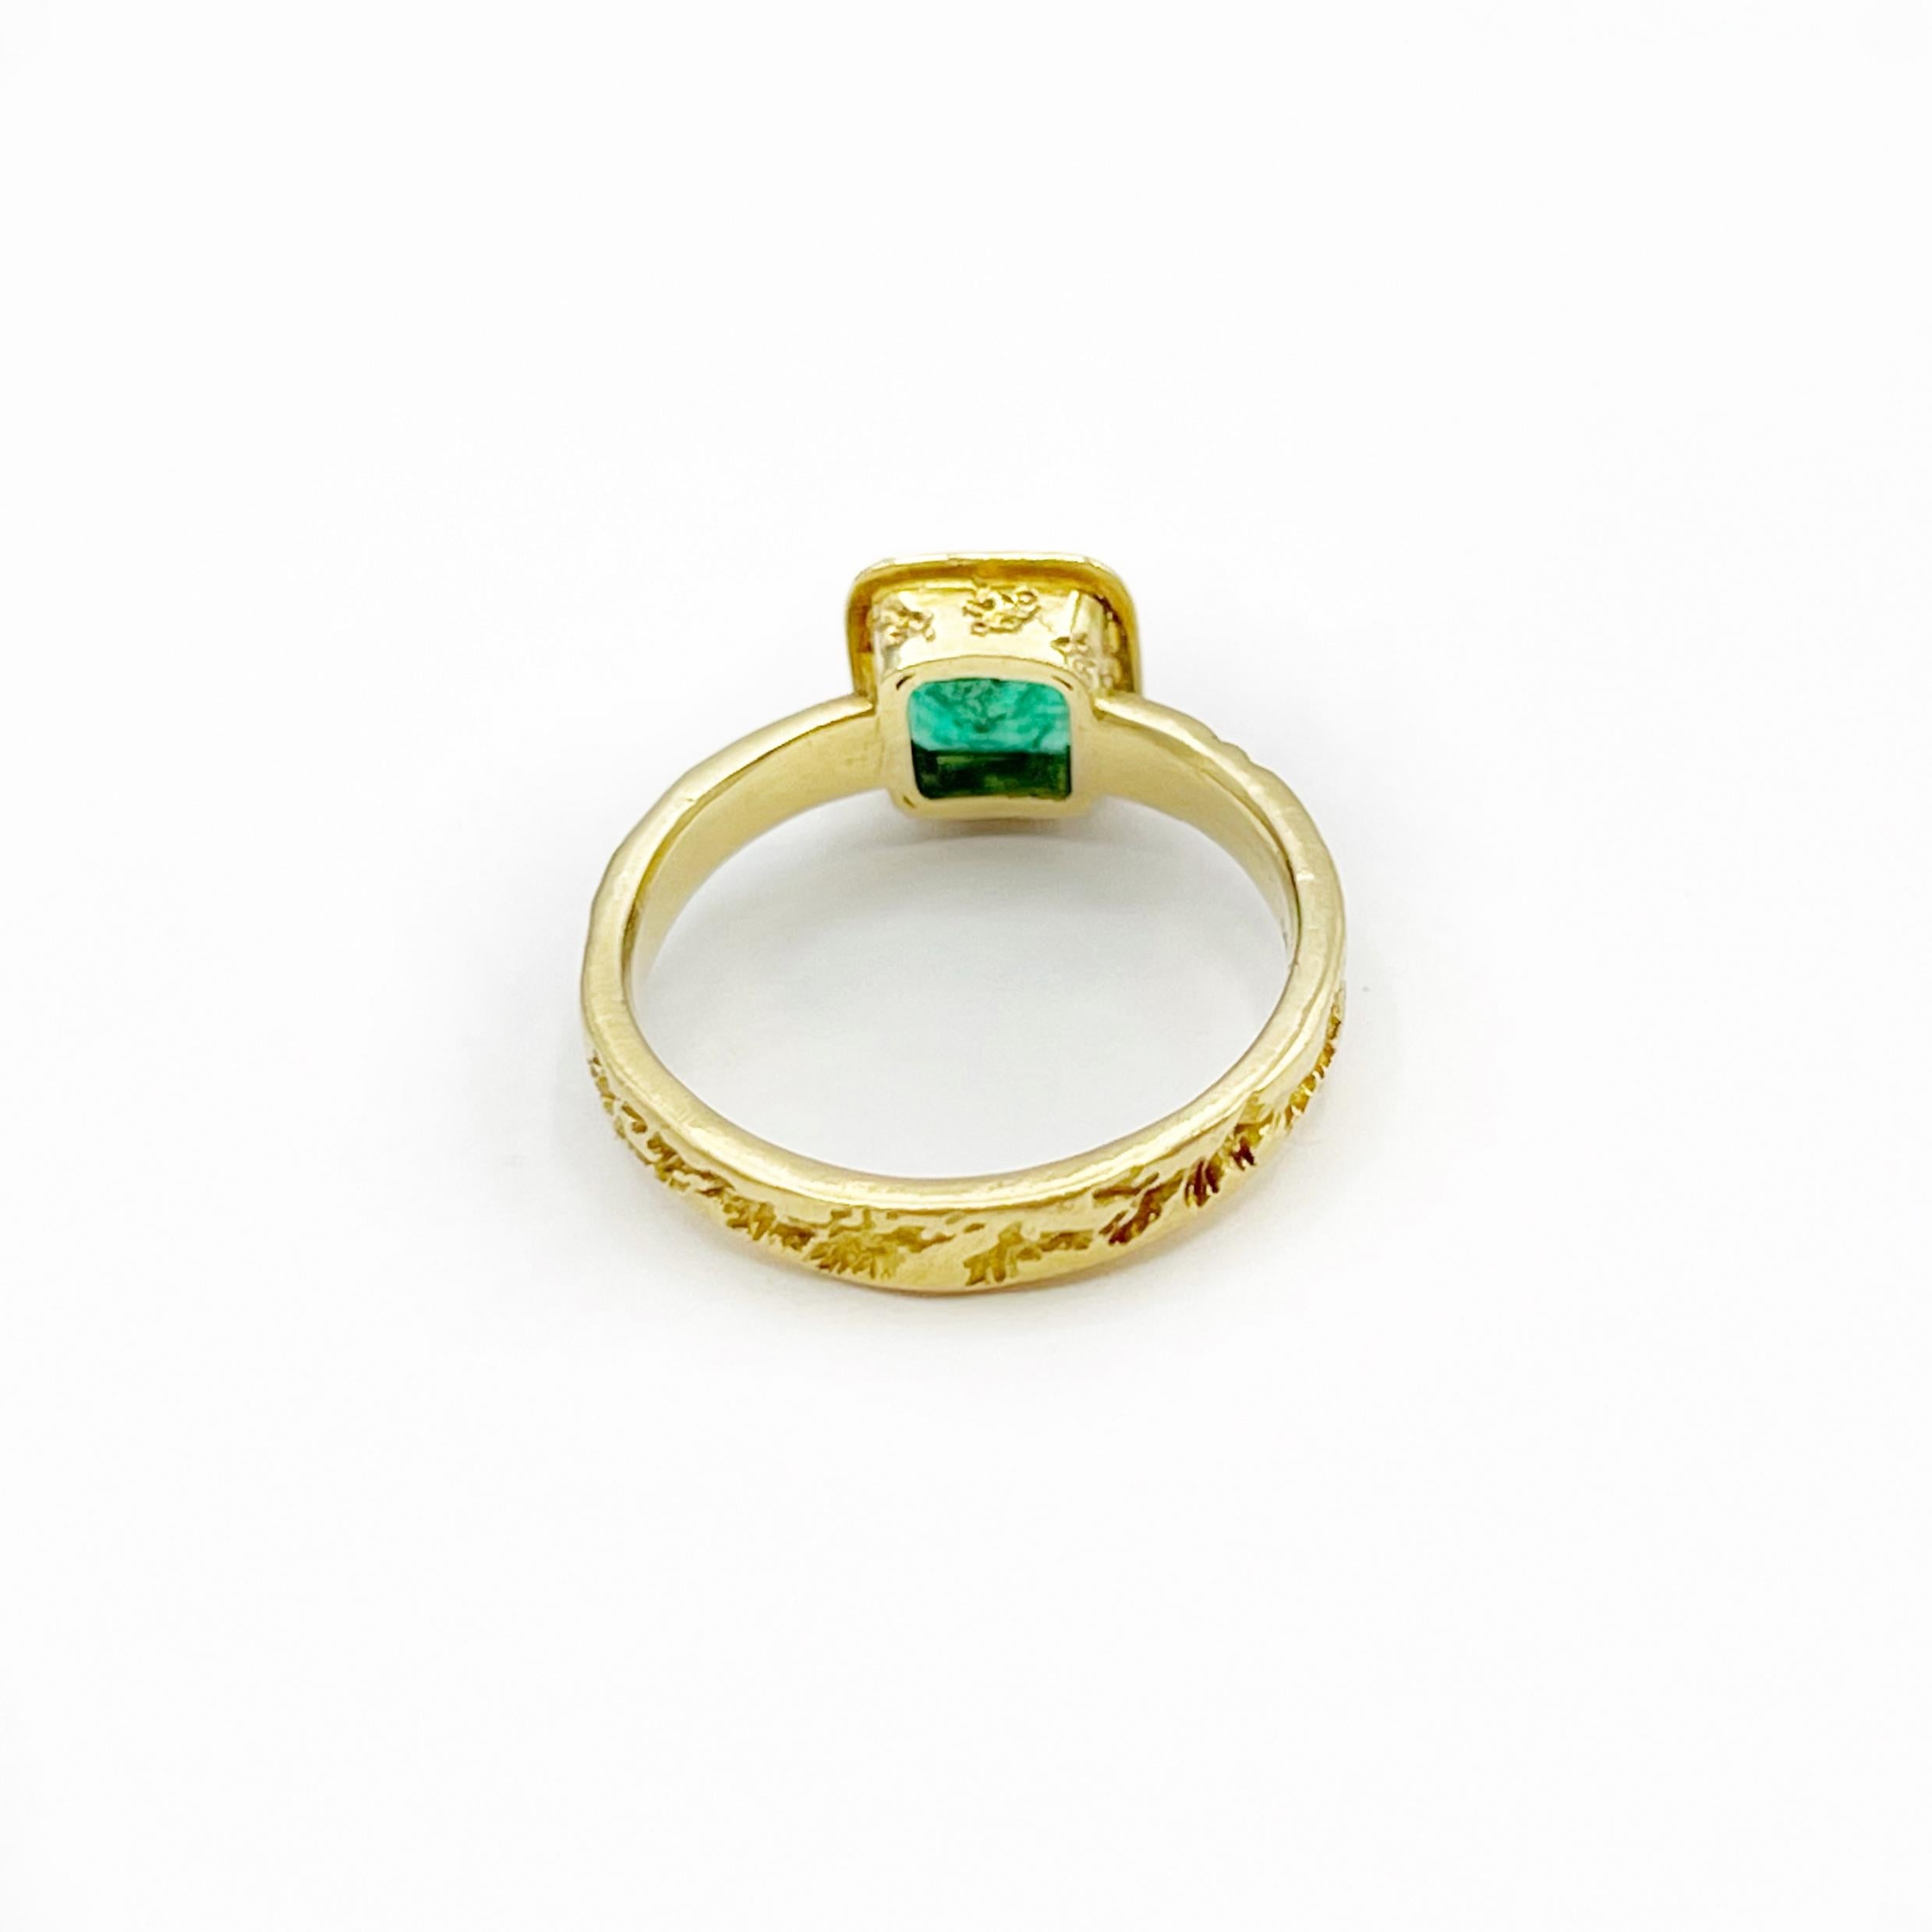 This beautiful emerald cut emerald is 1.10 carats set in heavy 18 karat gold. The design is classic and Old World with a touch of filigree. The ring is a size 6 1/2 and can be sized. You can wear it alone or stack with other rings and it would also